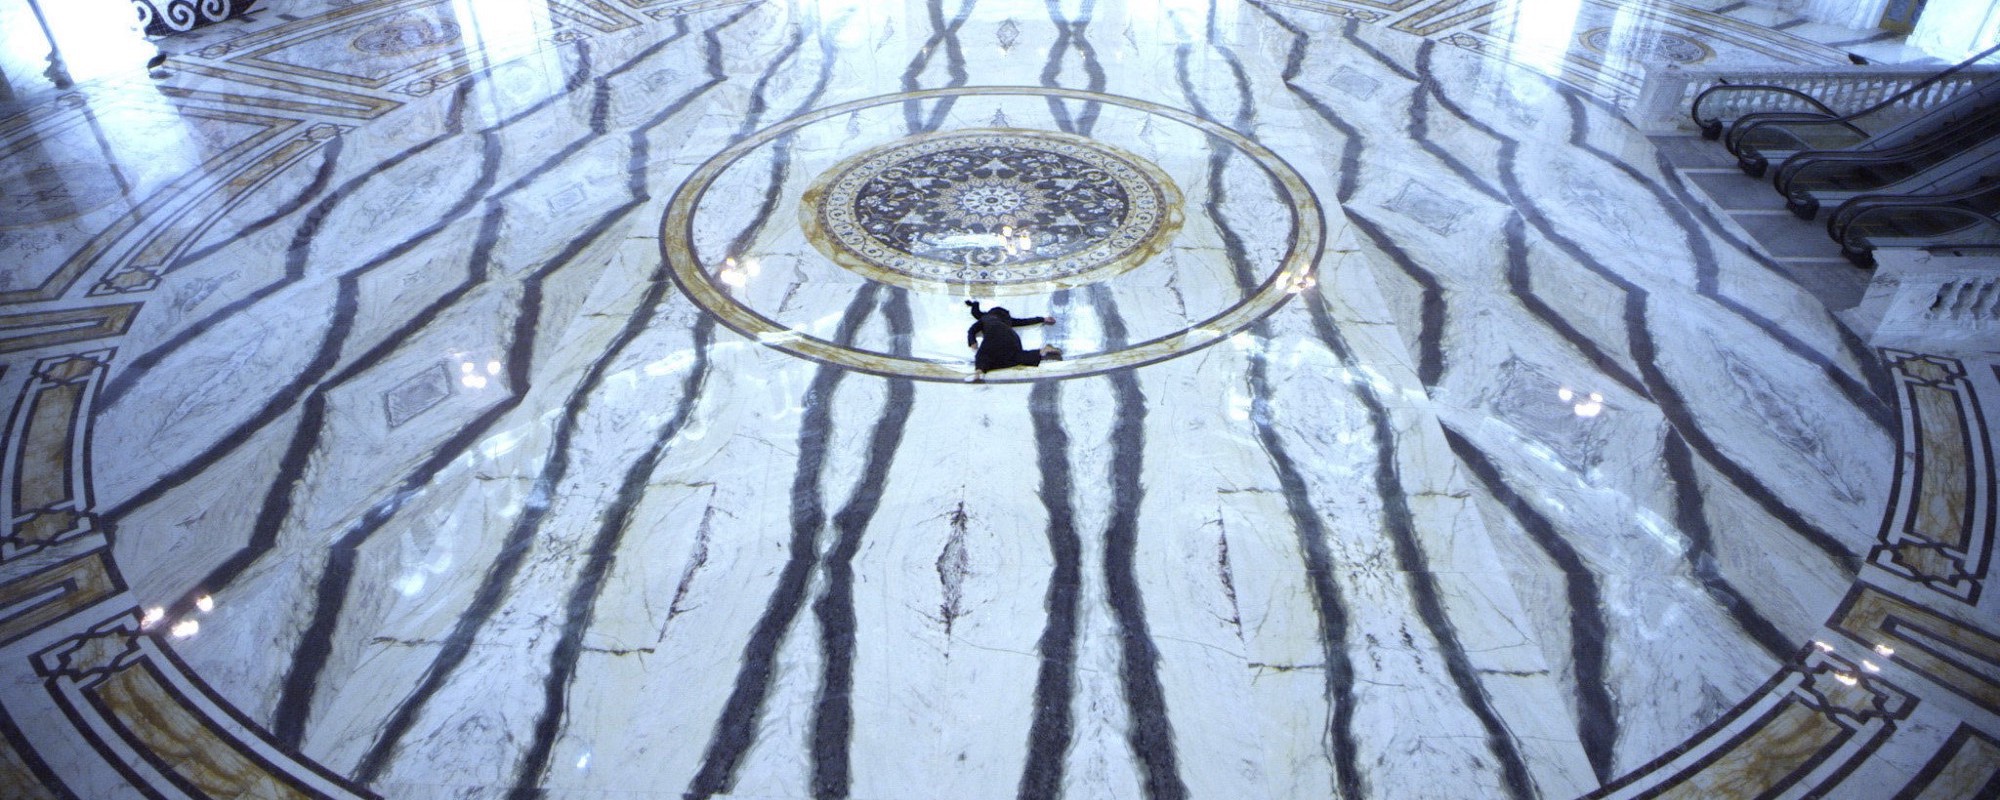 A figure in dark robes like sprawled in the center of a large, empty marble-floored gallery.